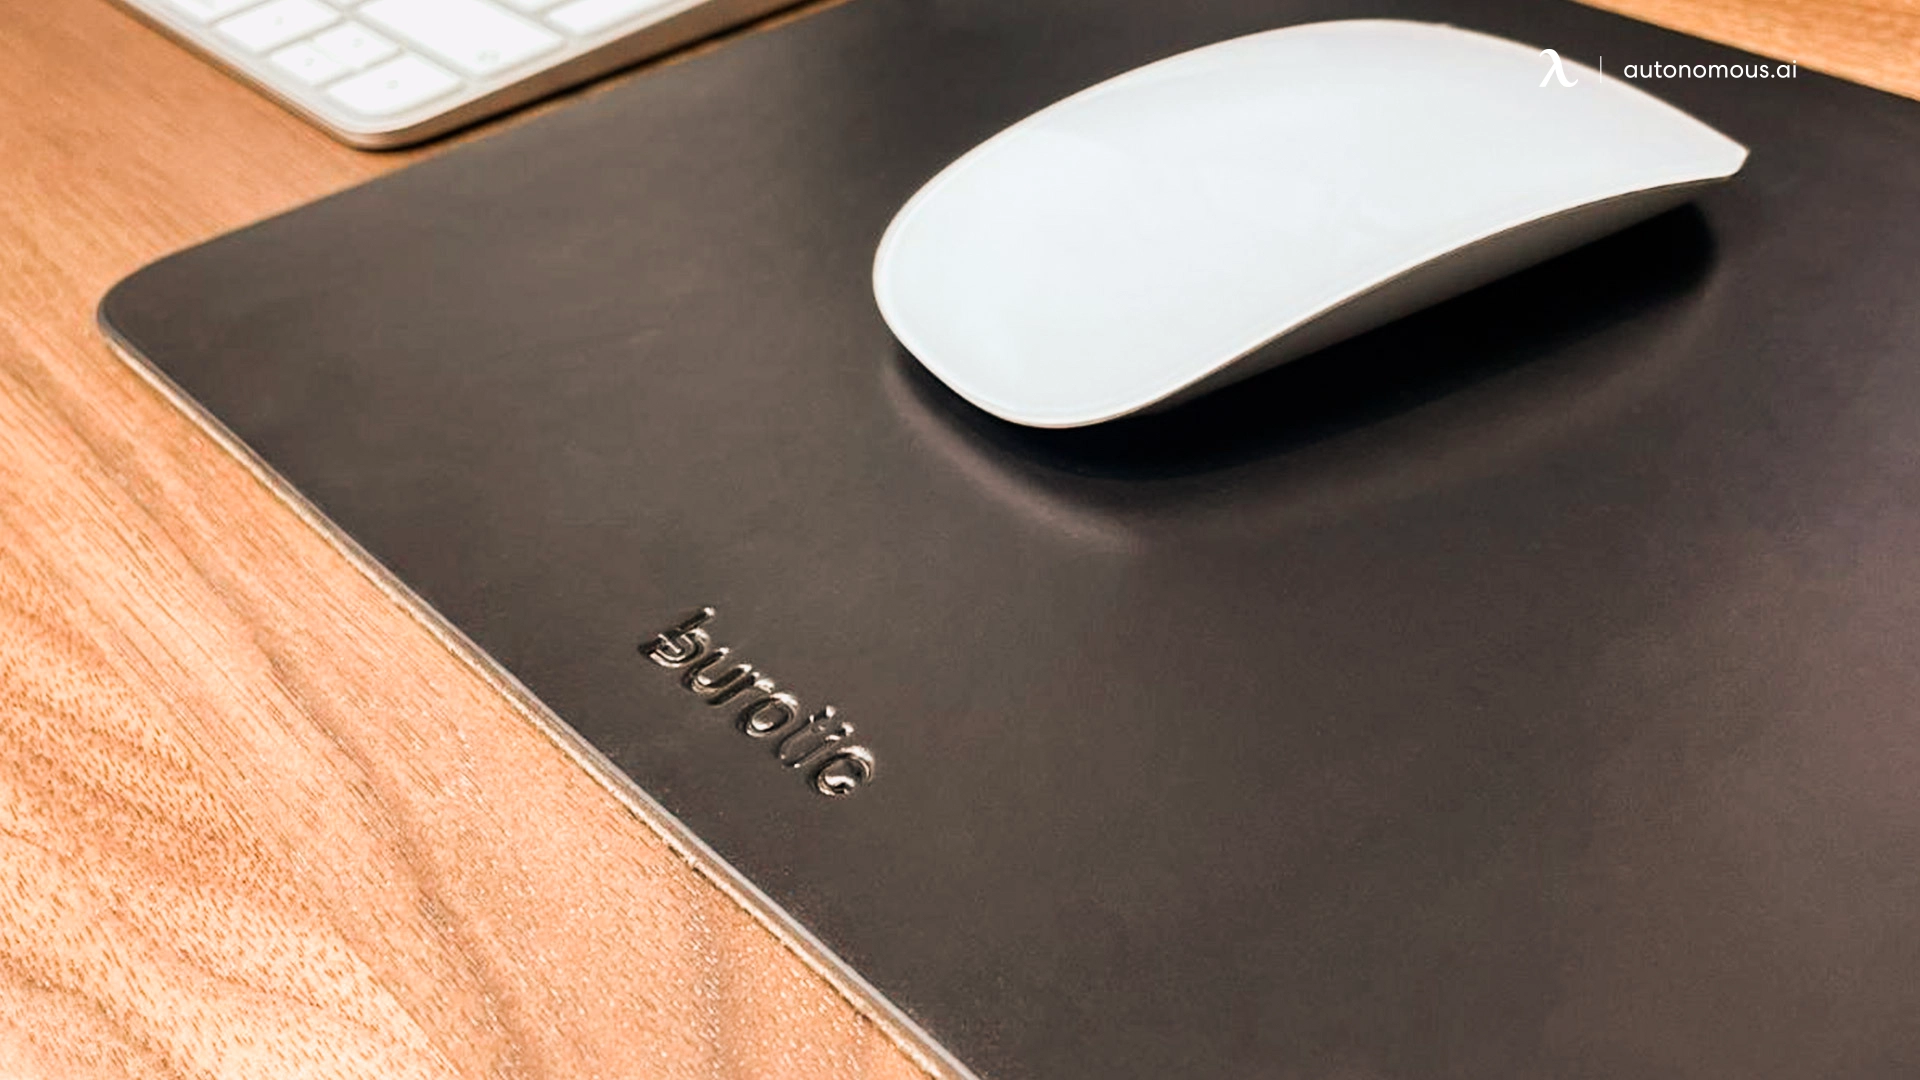 What Elements Can Affect the Mouse Pad's Performance?